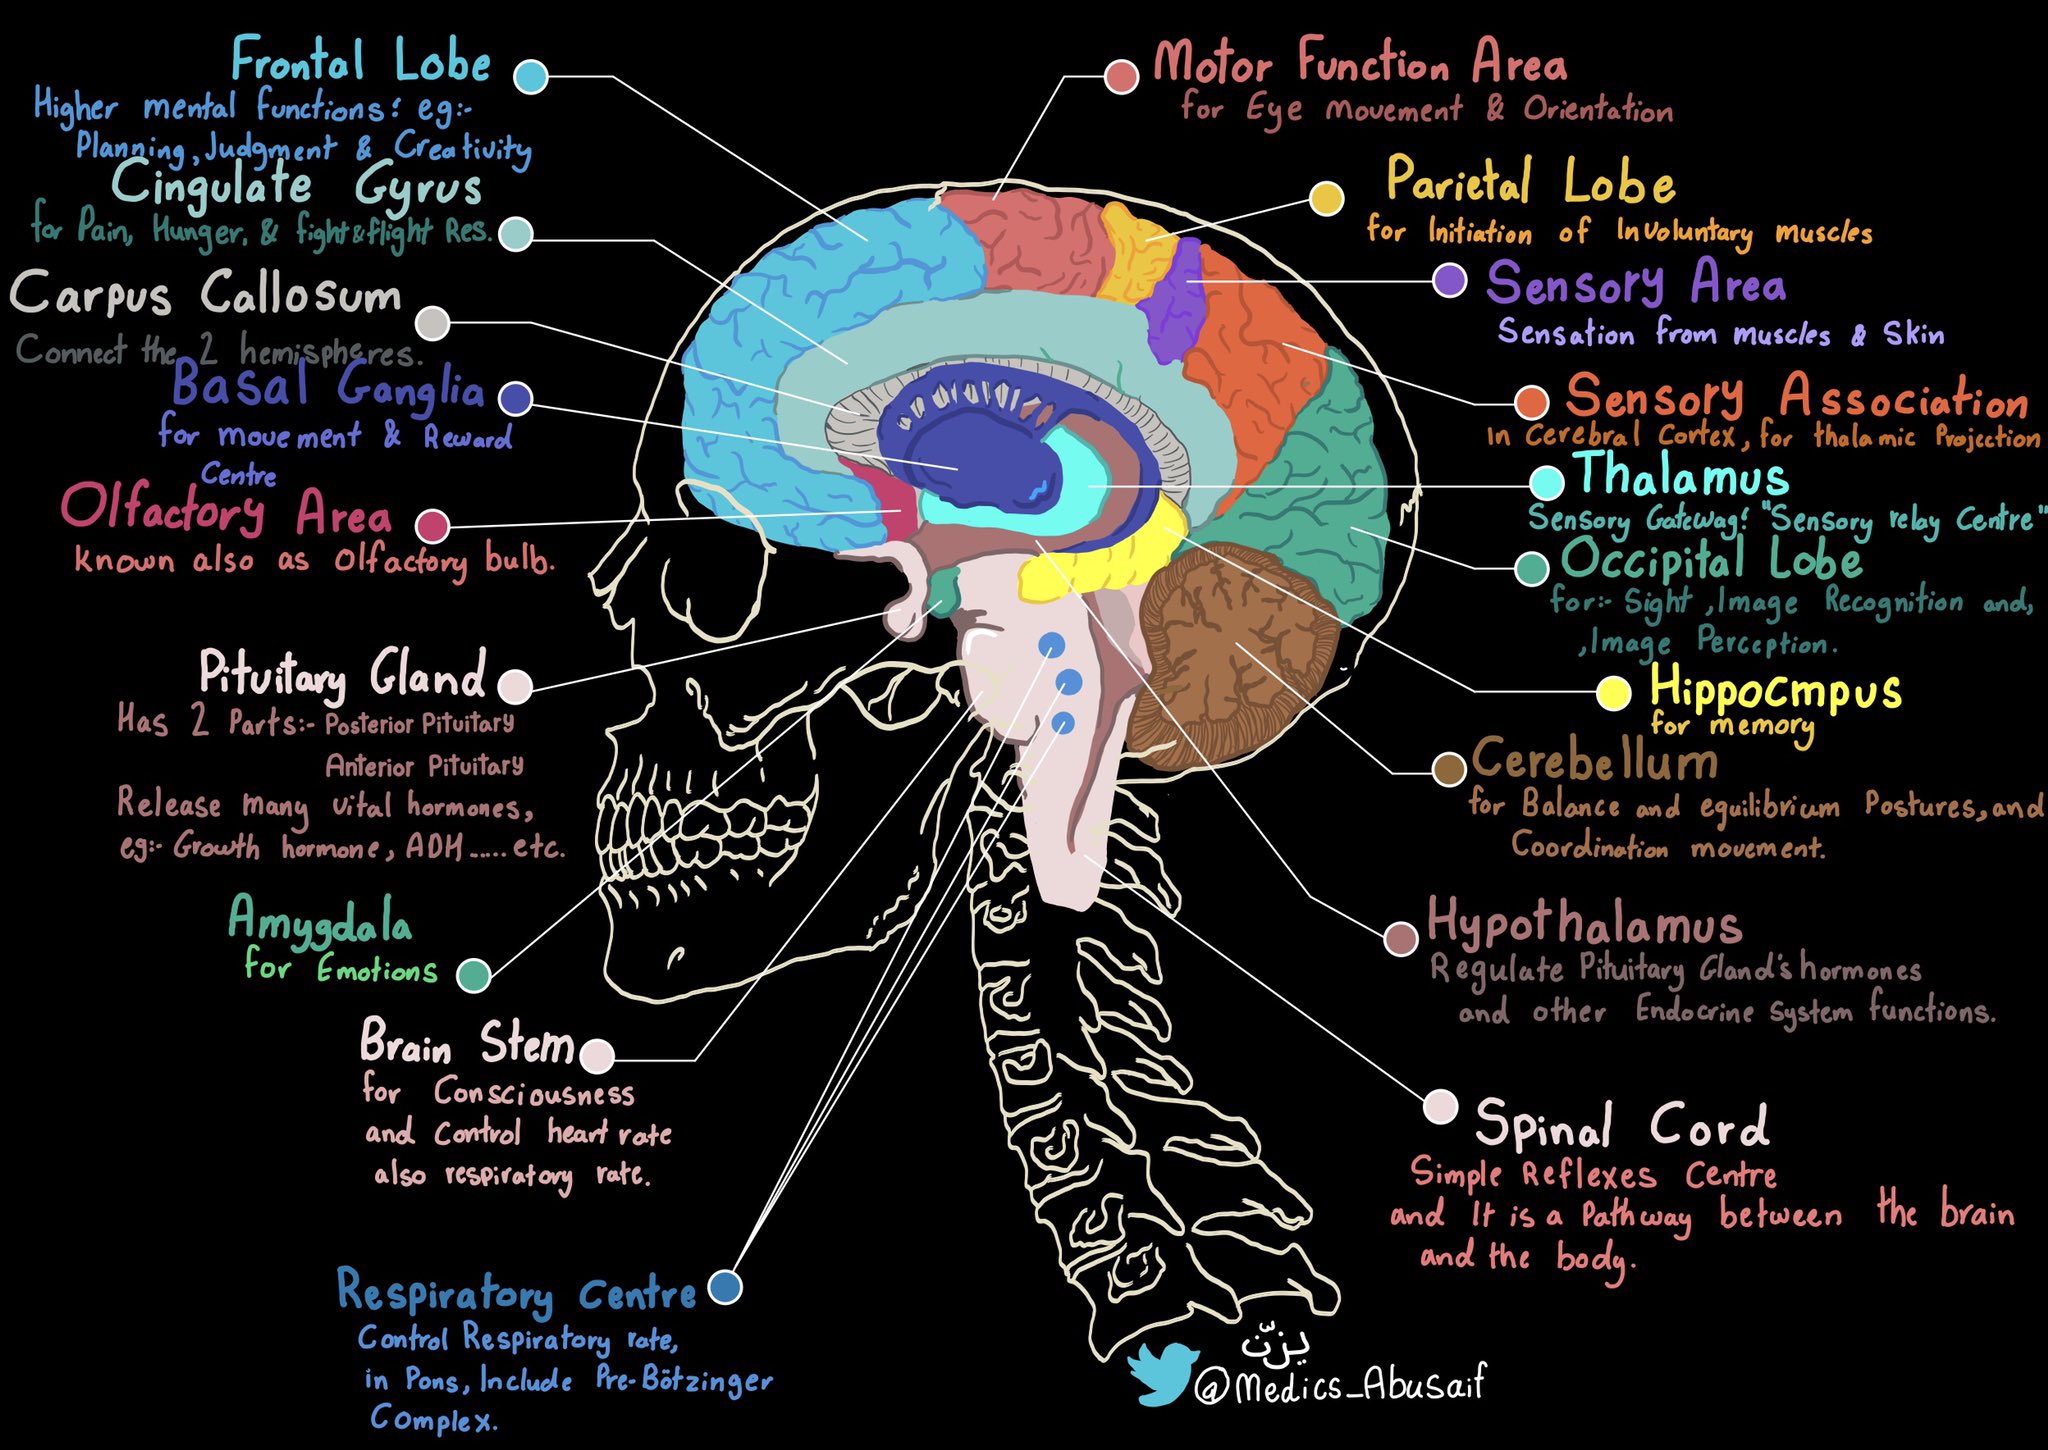 parts of the brain and functions